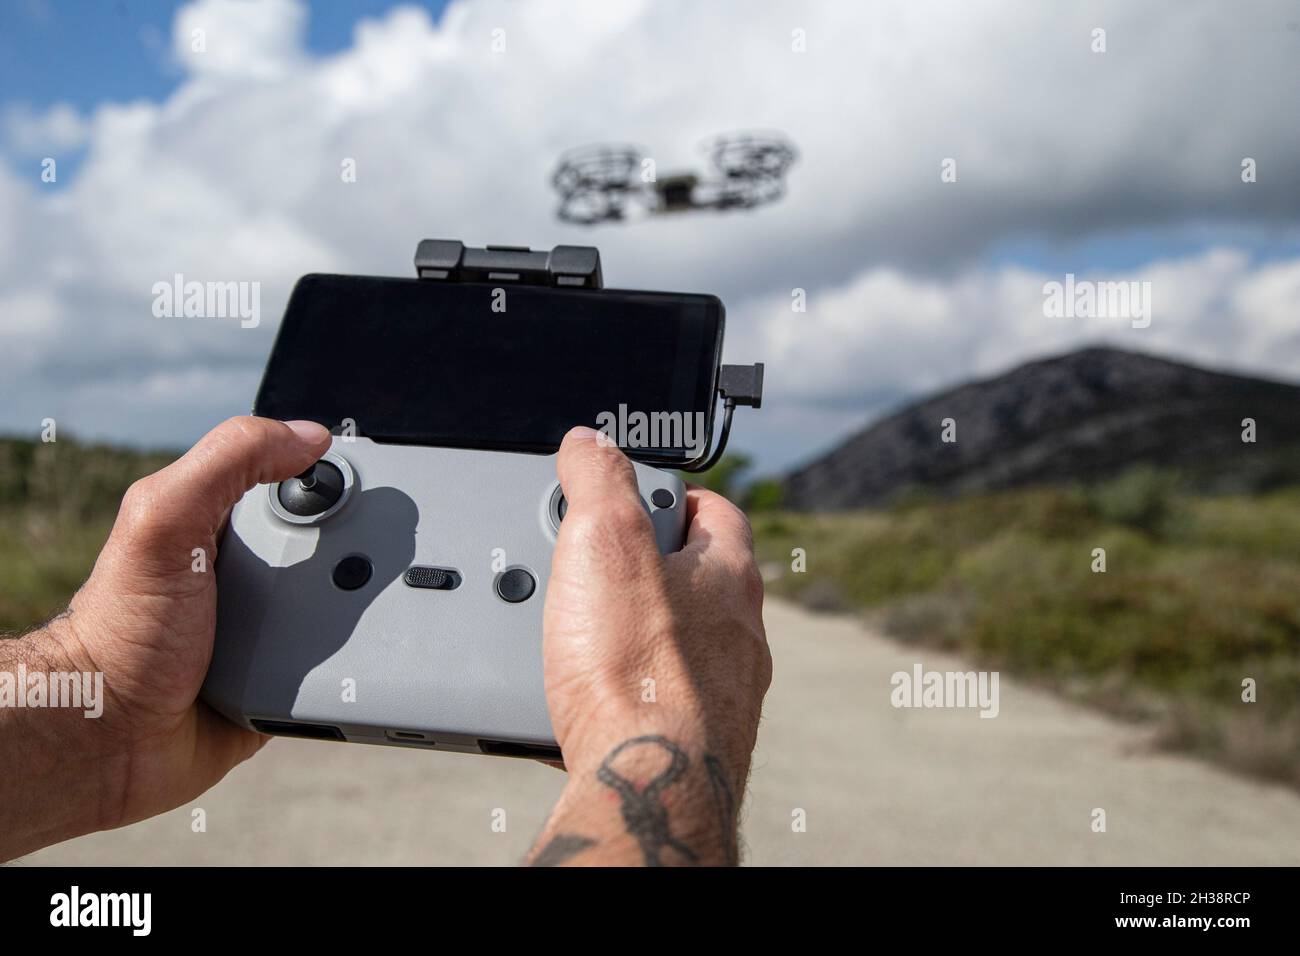 Man's hands operating the remote control of the unmanned drone Stock Photo